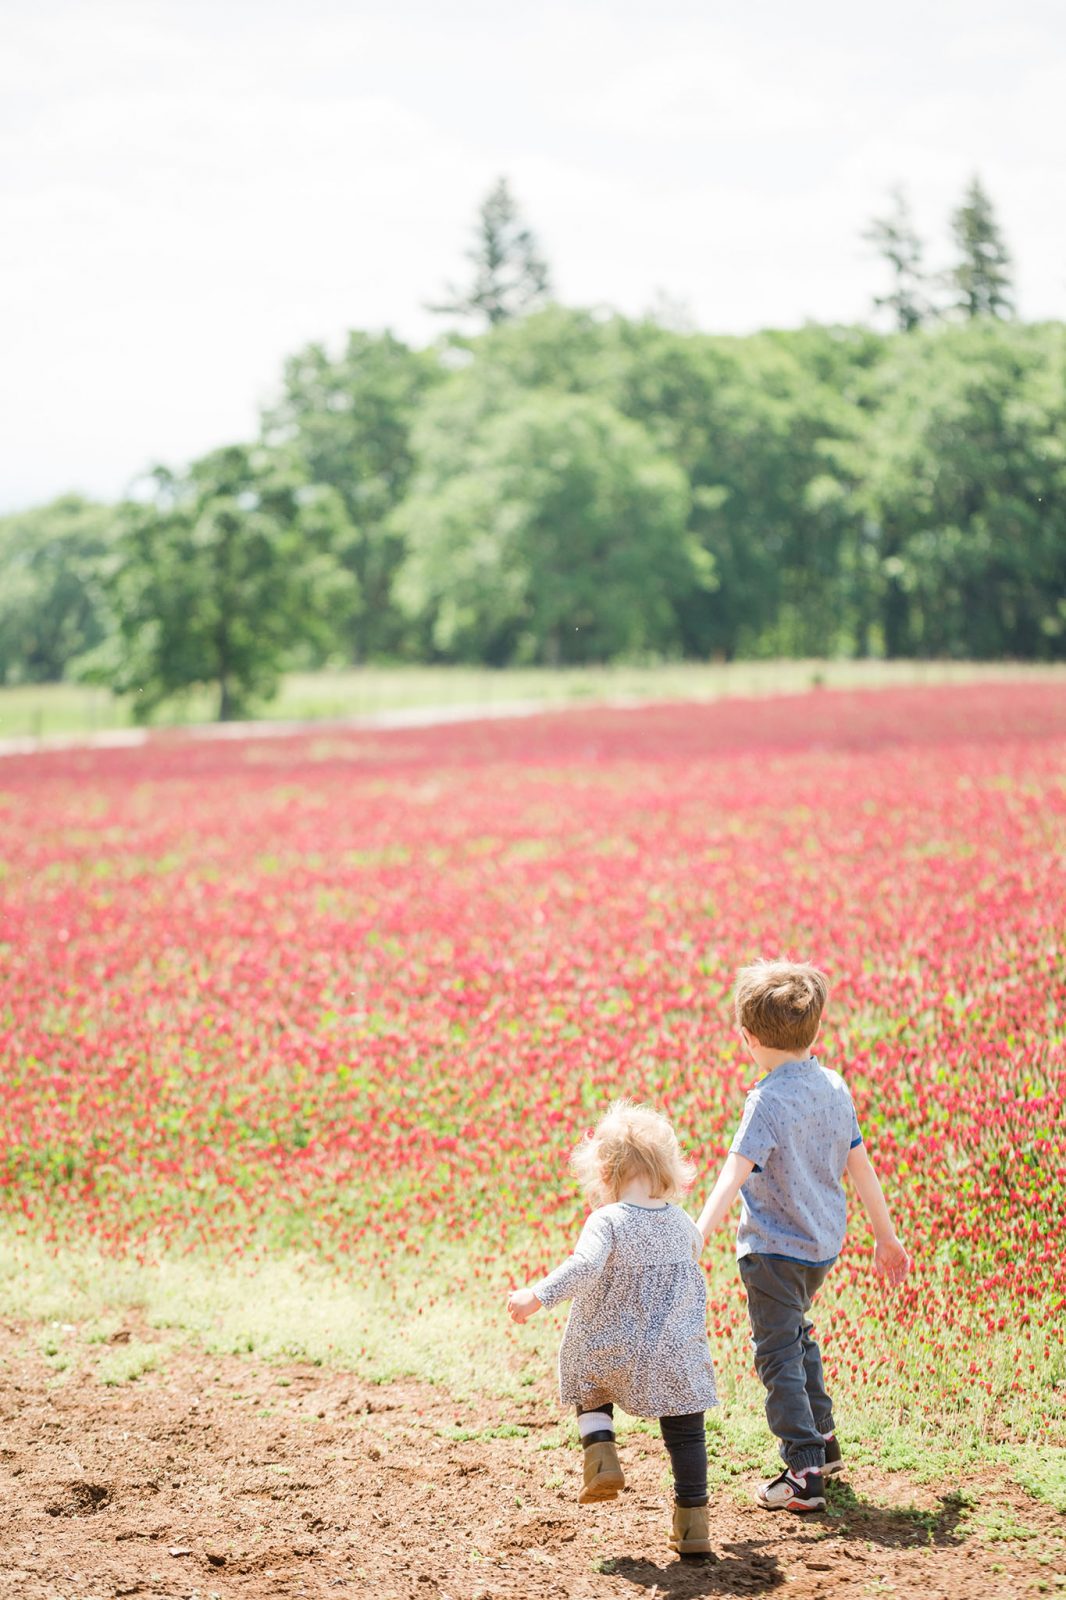 Bob and Crystal Rilee Trail In Yamhill County - Kid friendly hike with a view and flower field